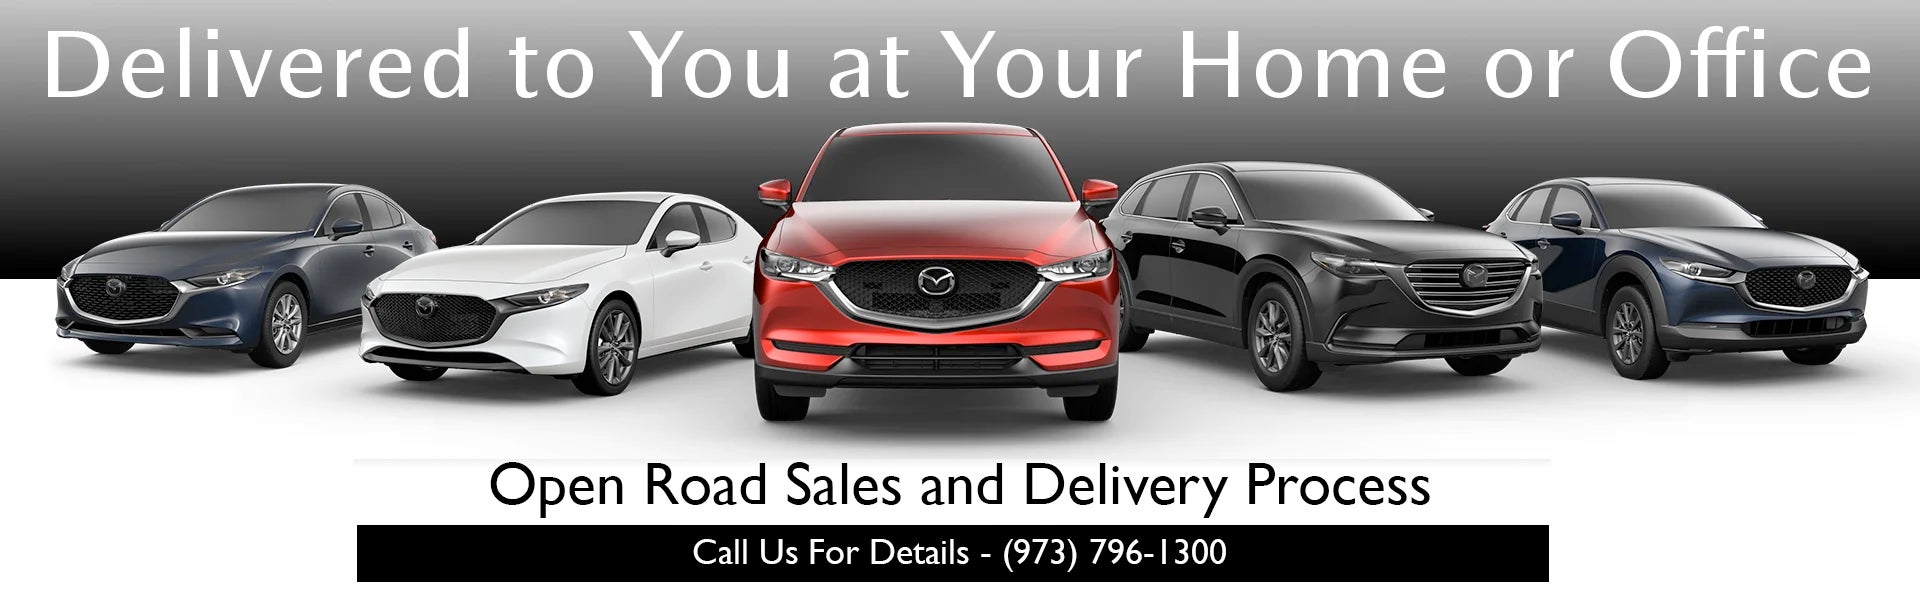 Open Road Mazda of Morristown in Morristown NJ CPO and Loyalty